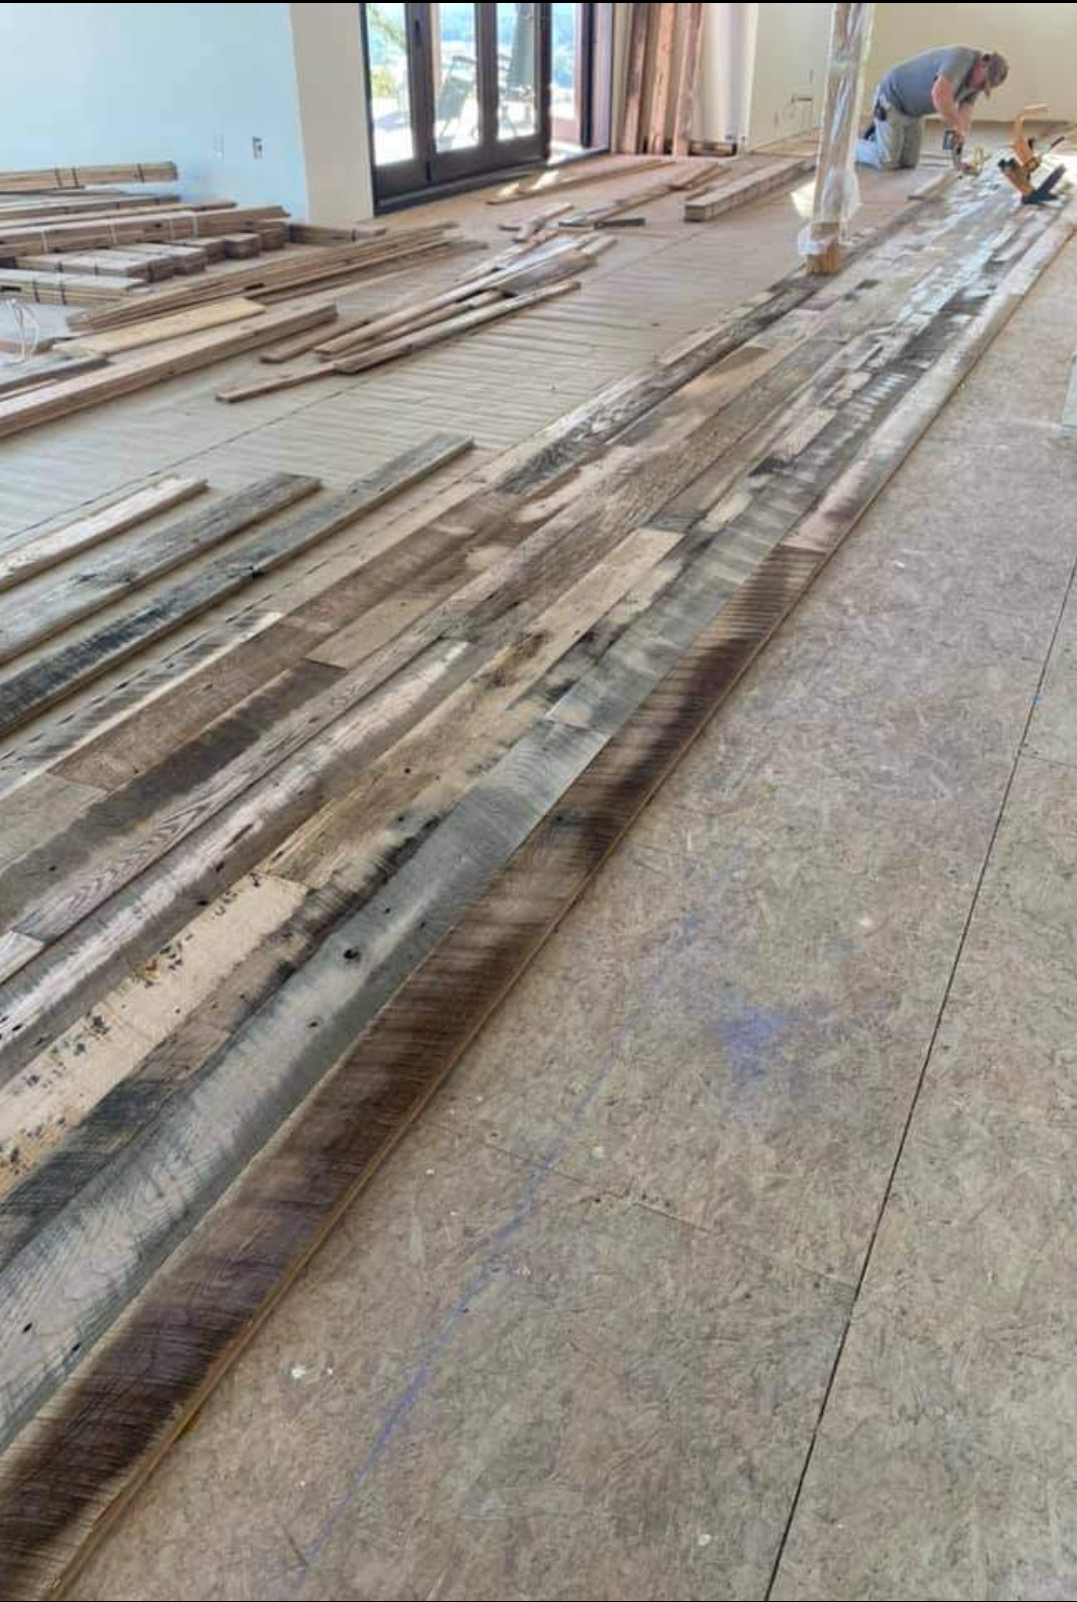 Staggered row of 3, 4, and 5, inch Reclaimed Red Oak Barn Wood Floor